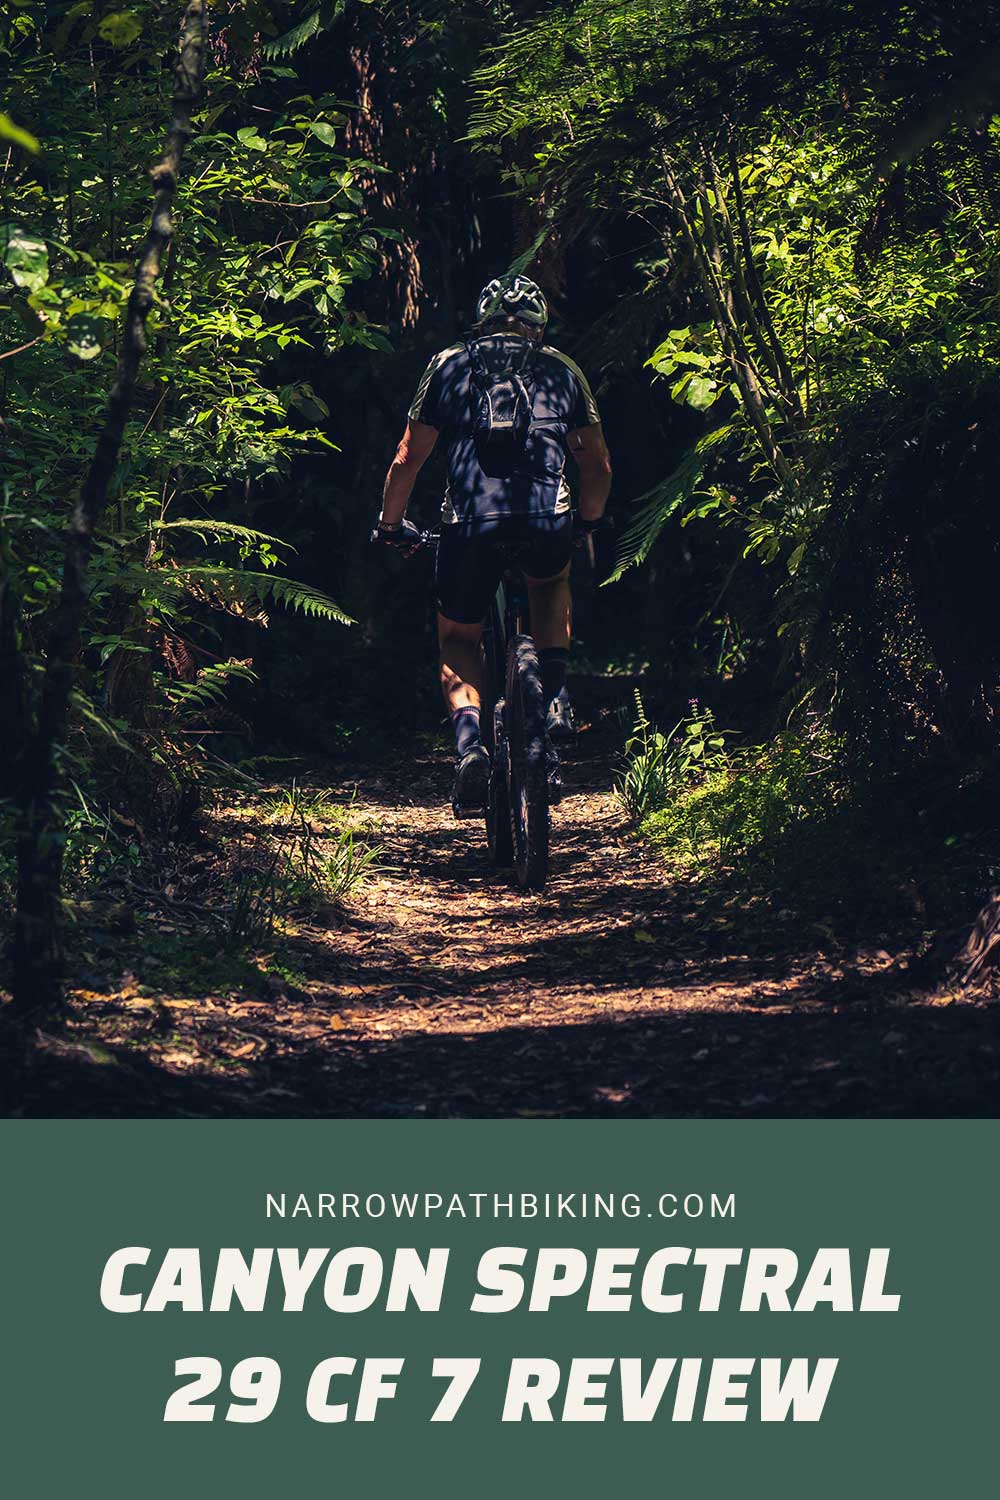 person riding mountain bike on a narrow path in forest - Canyon Spectral 29 CF 7 Review